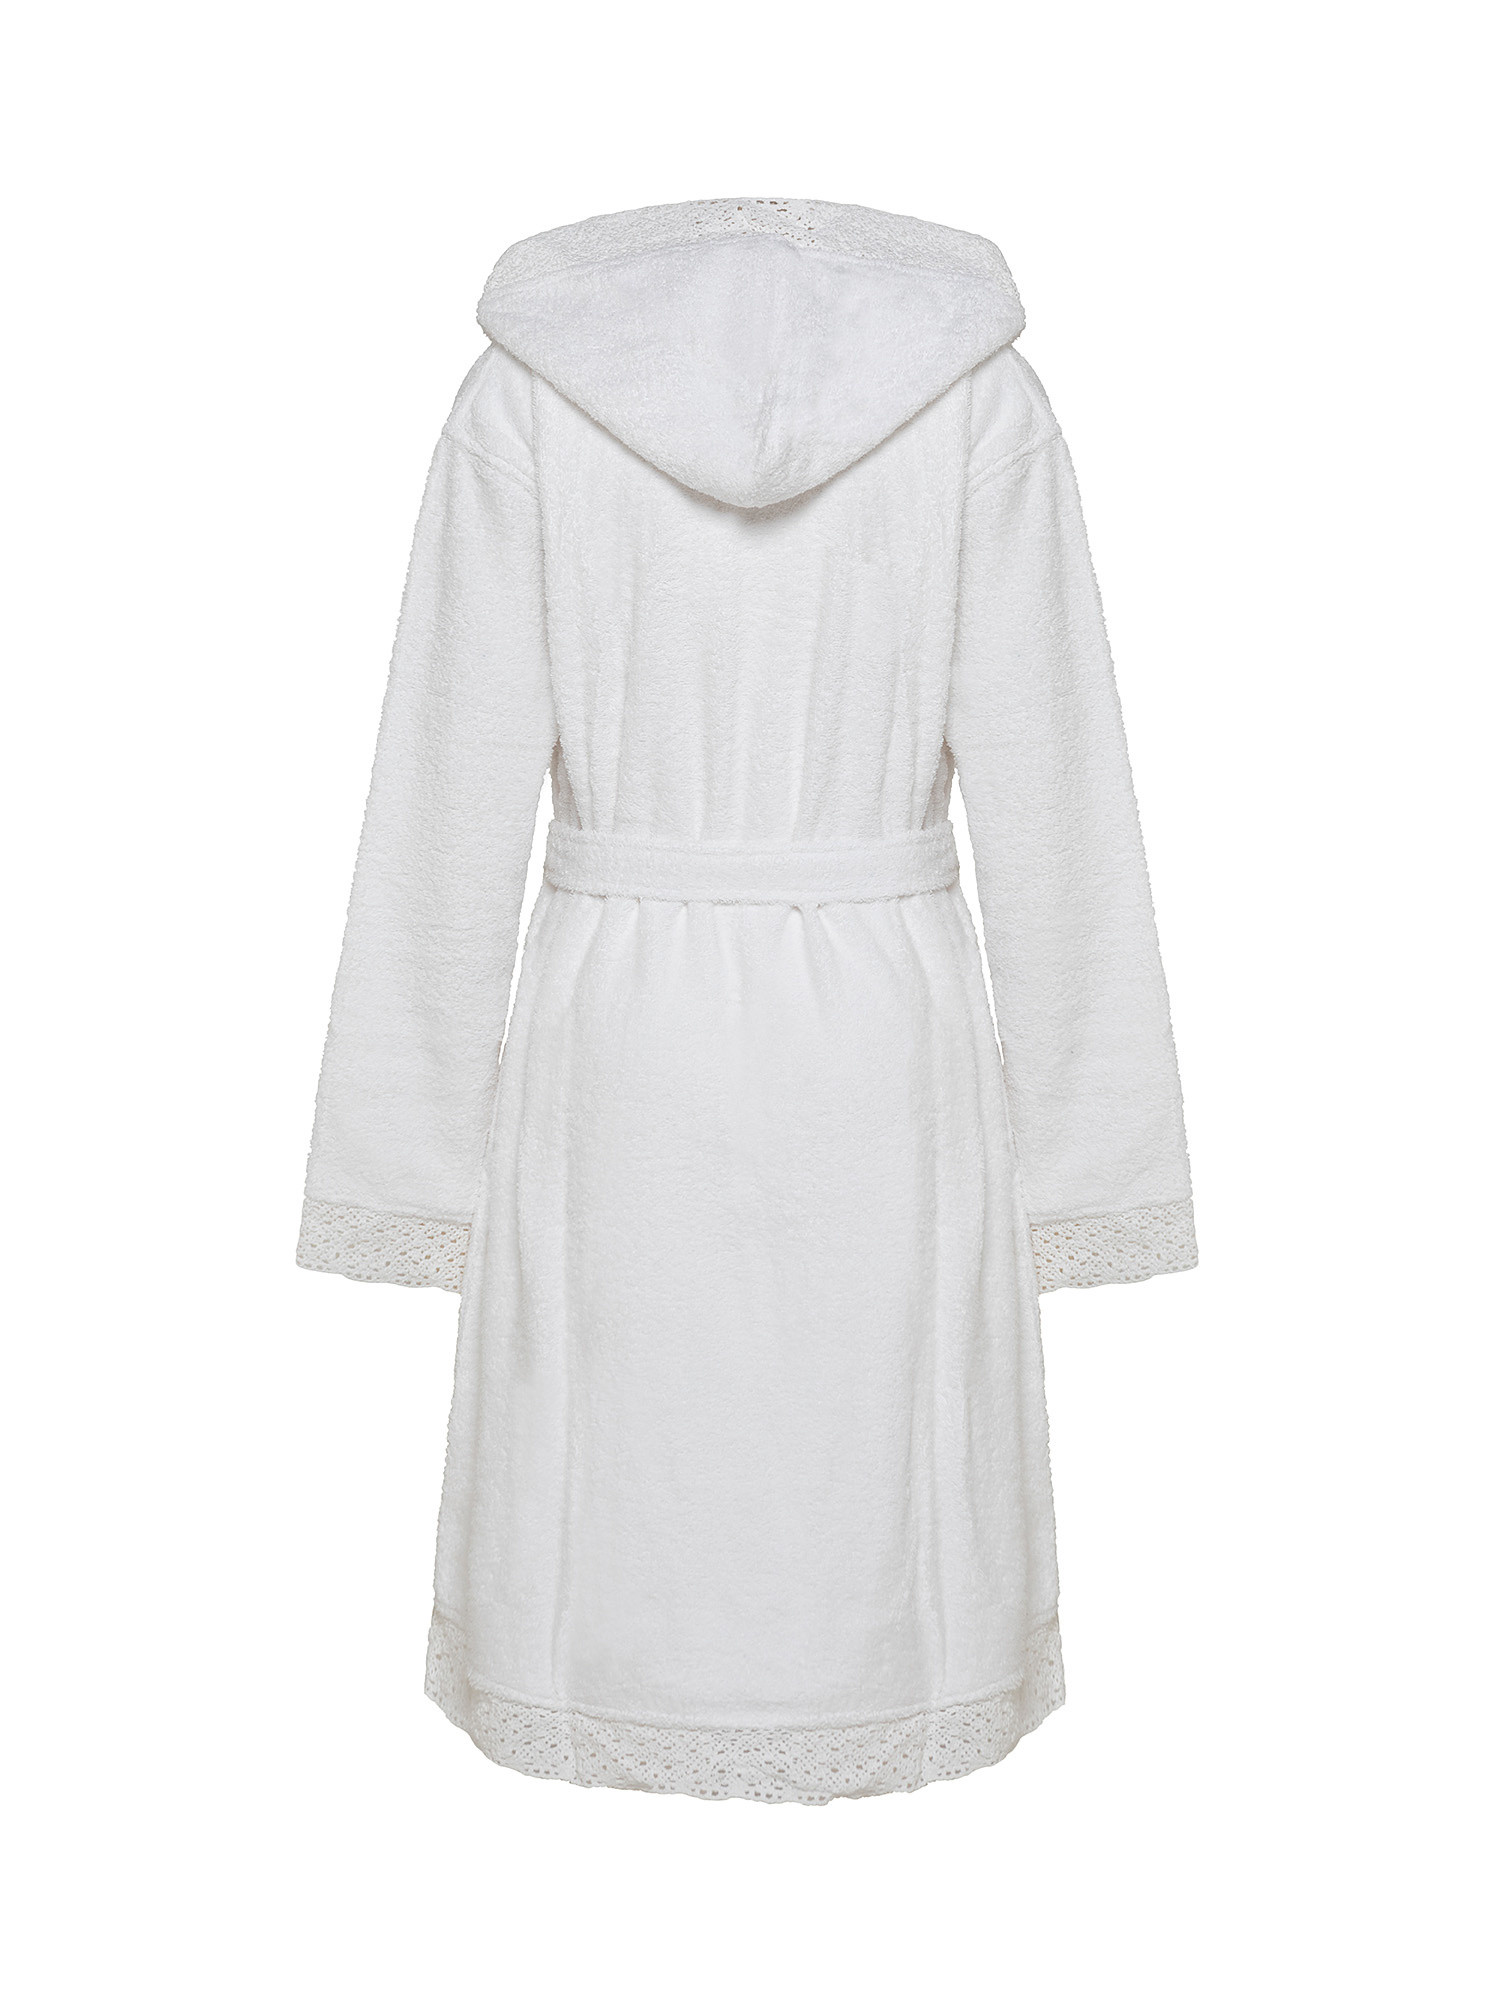 Cotton bathrobe with lace applications, White, large image number 1